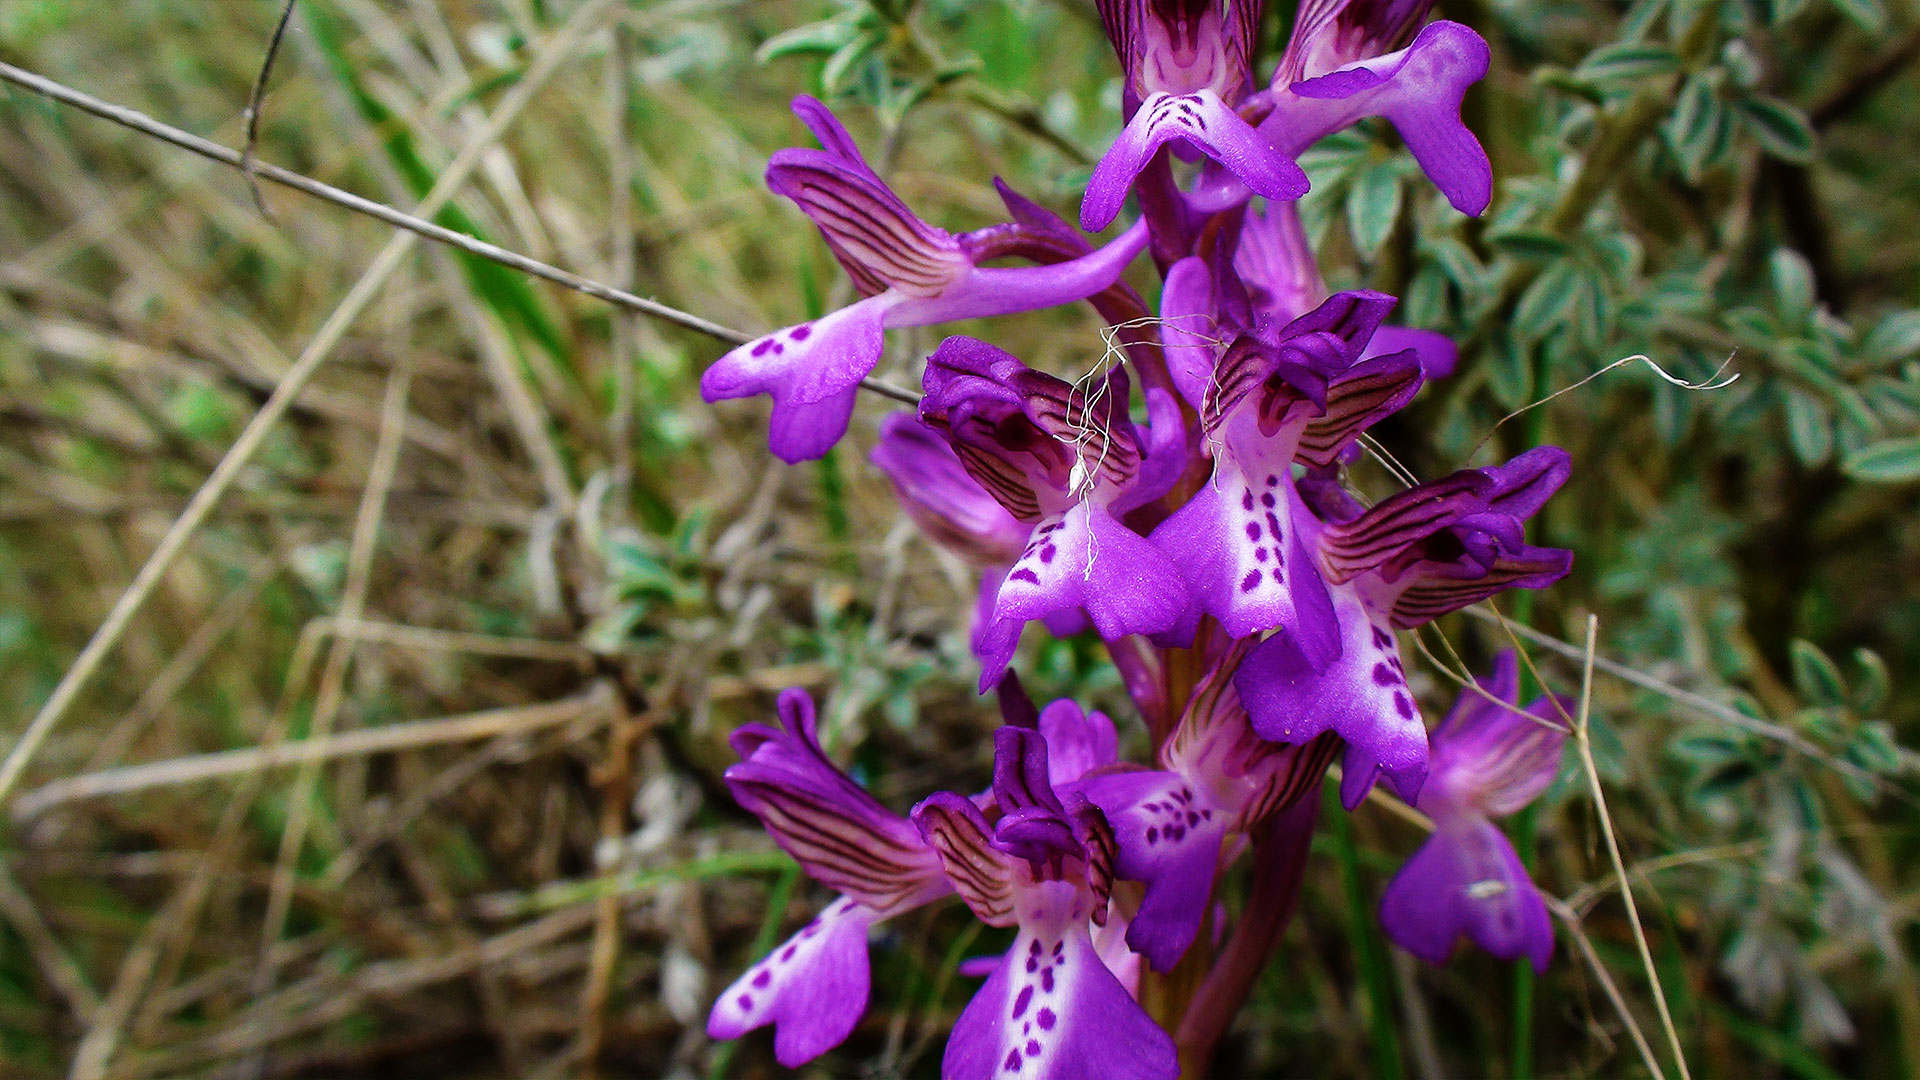 File:Wild Orchid in Elatia forest.jpg - Wikimedia Commons